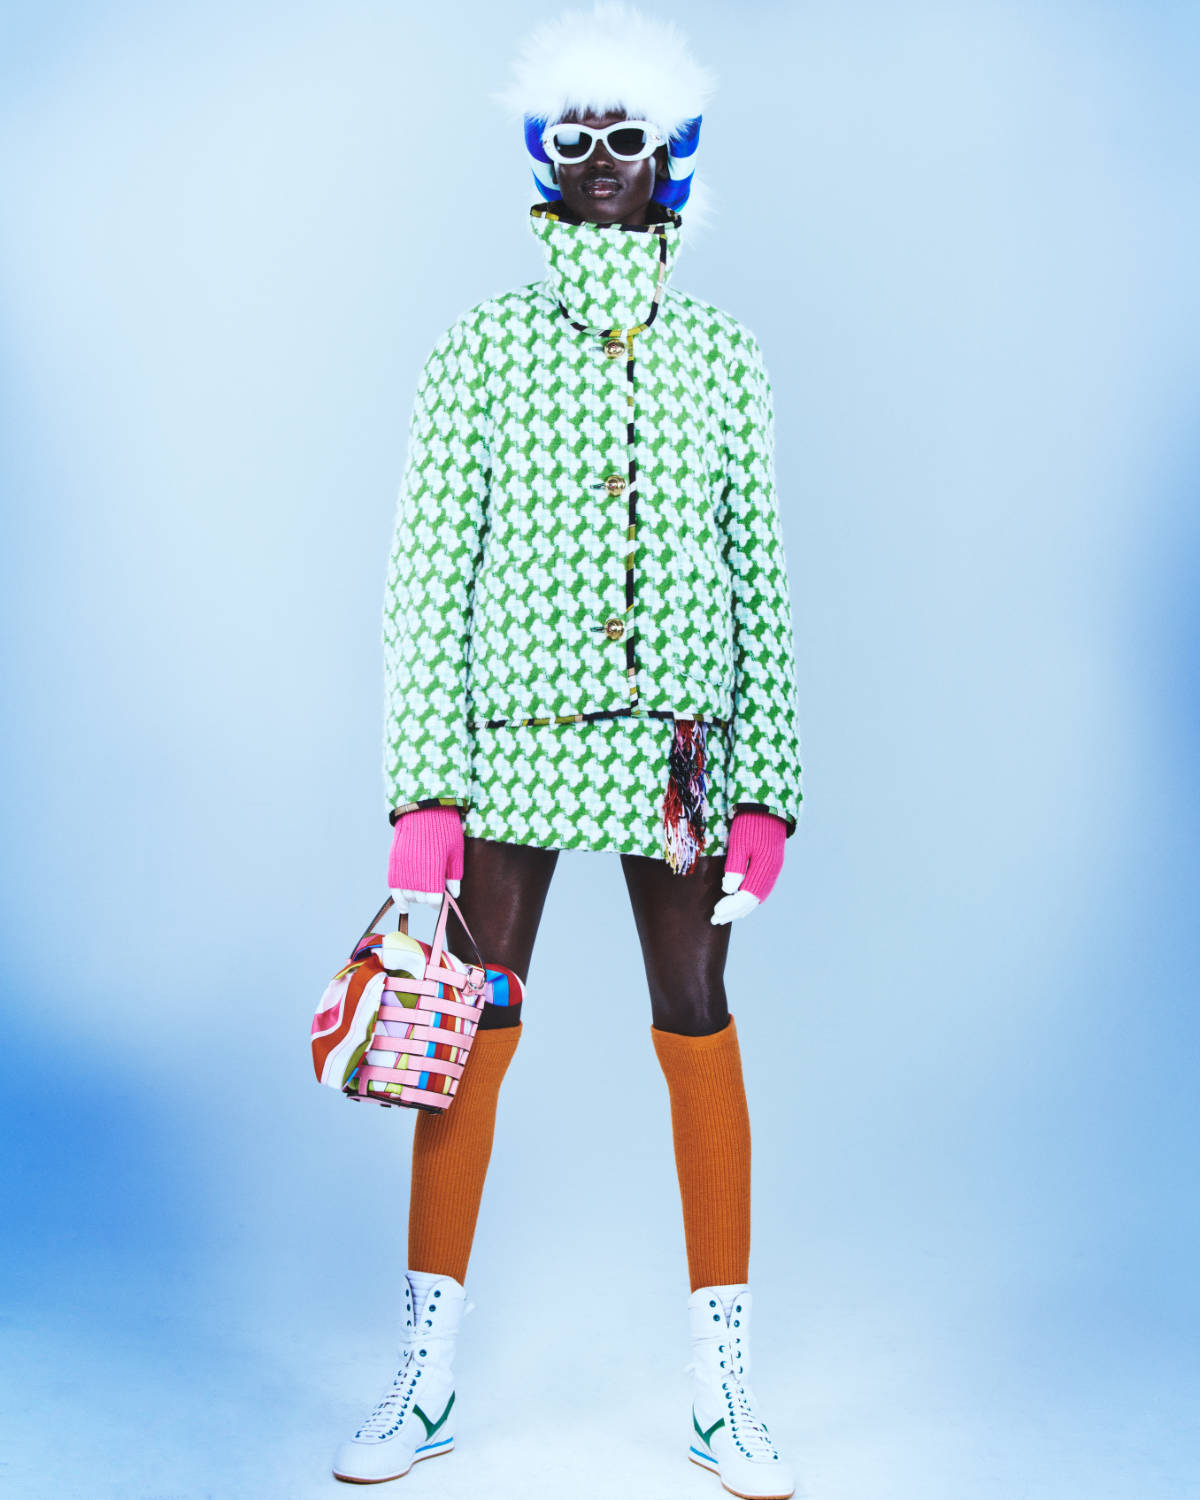 Pucci Presents Its New Spring Summer 2023 Resort Collection: La Famiglia